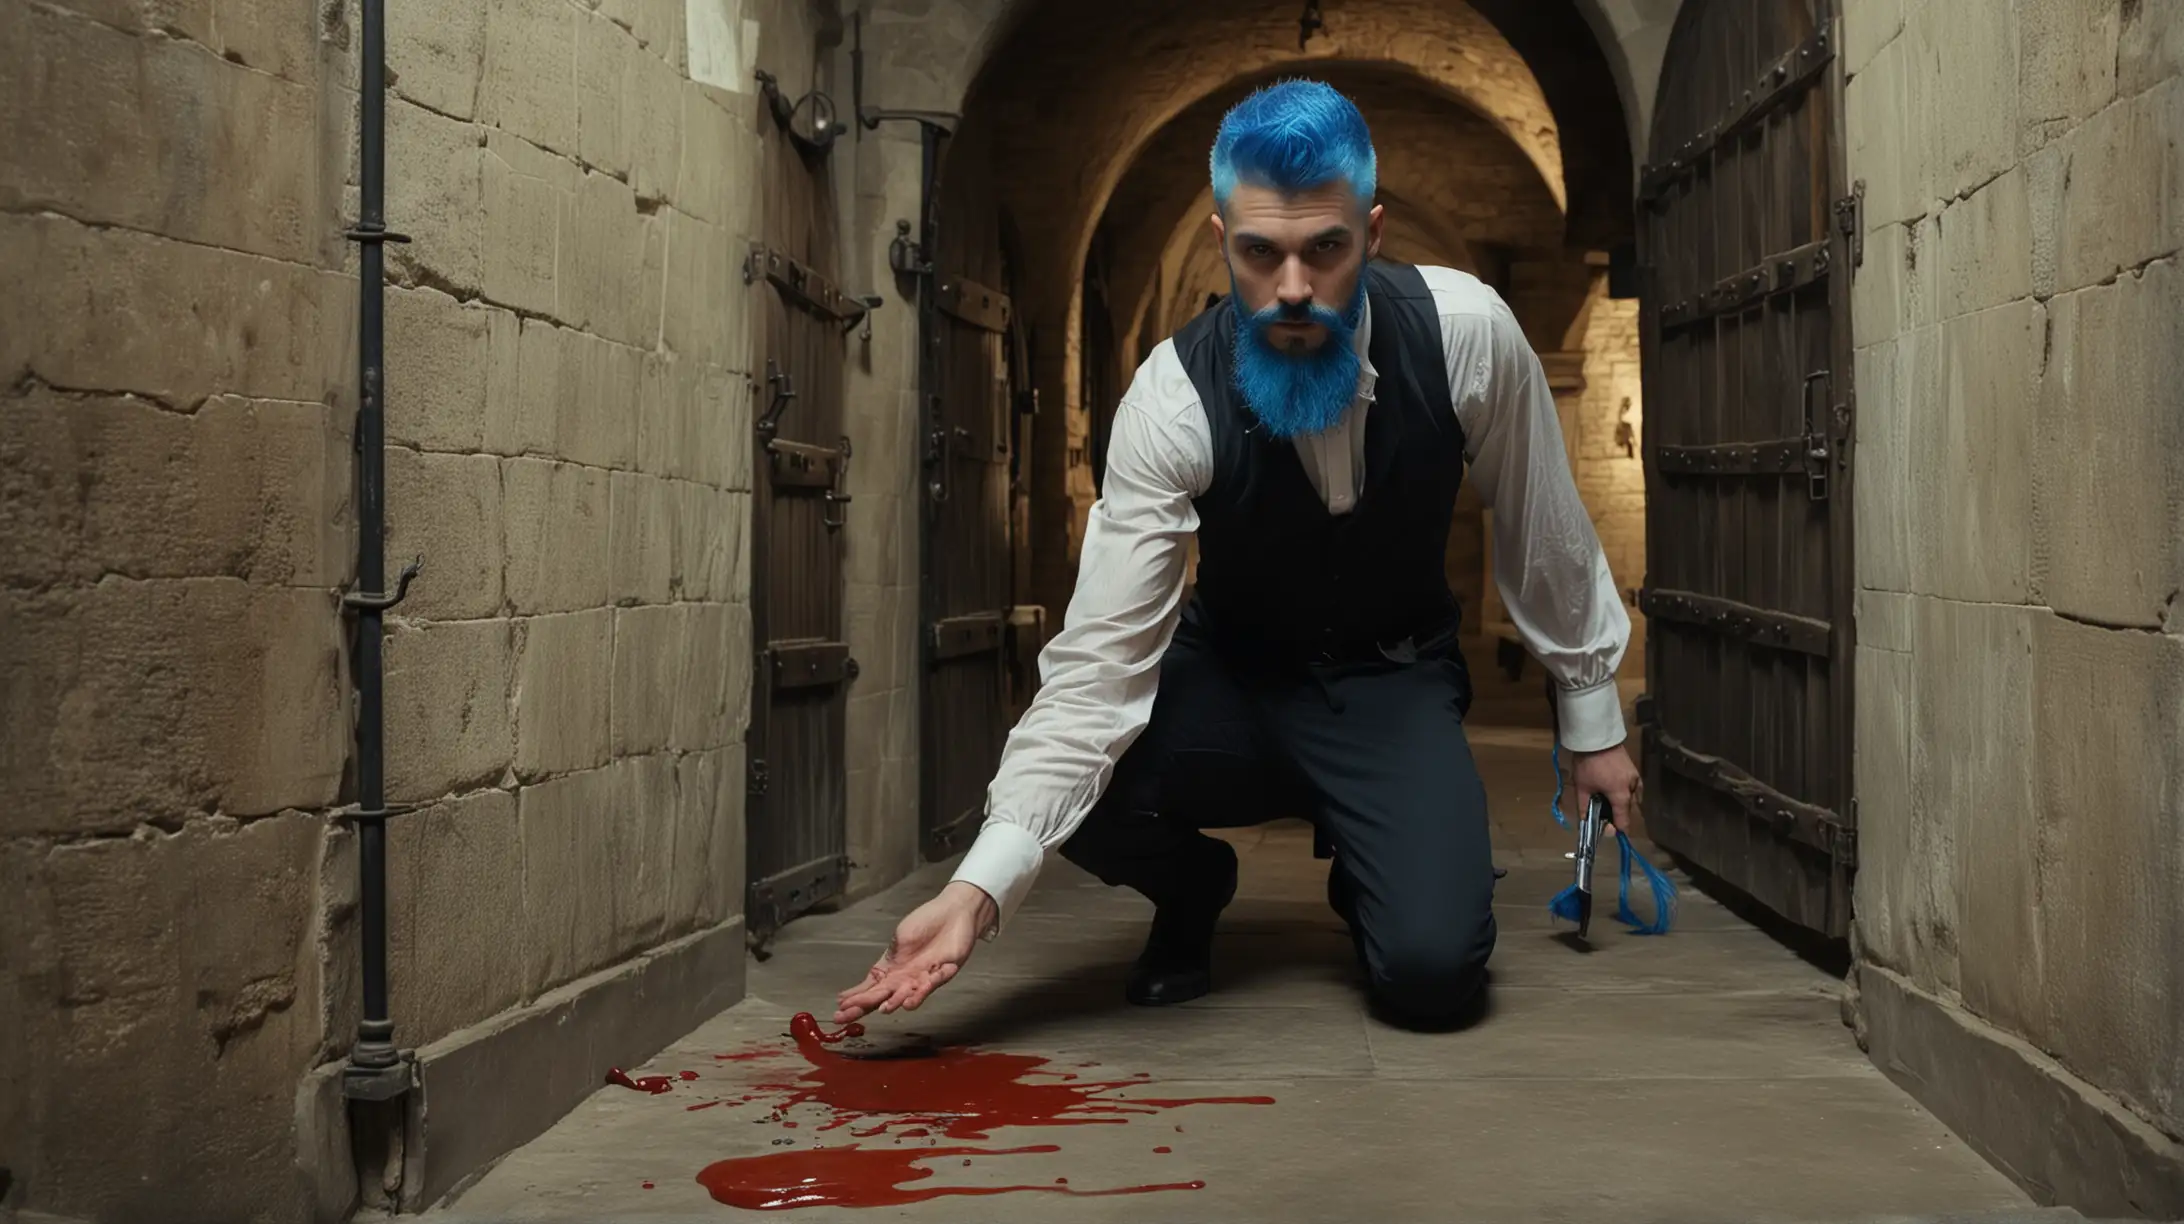 aristocratic young man with blue beard entering the dungeon, blood on floor